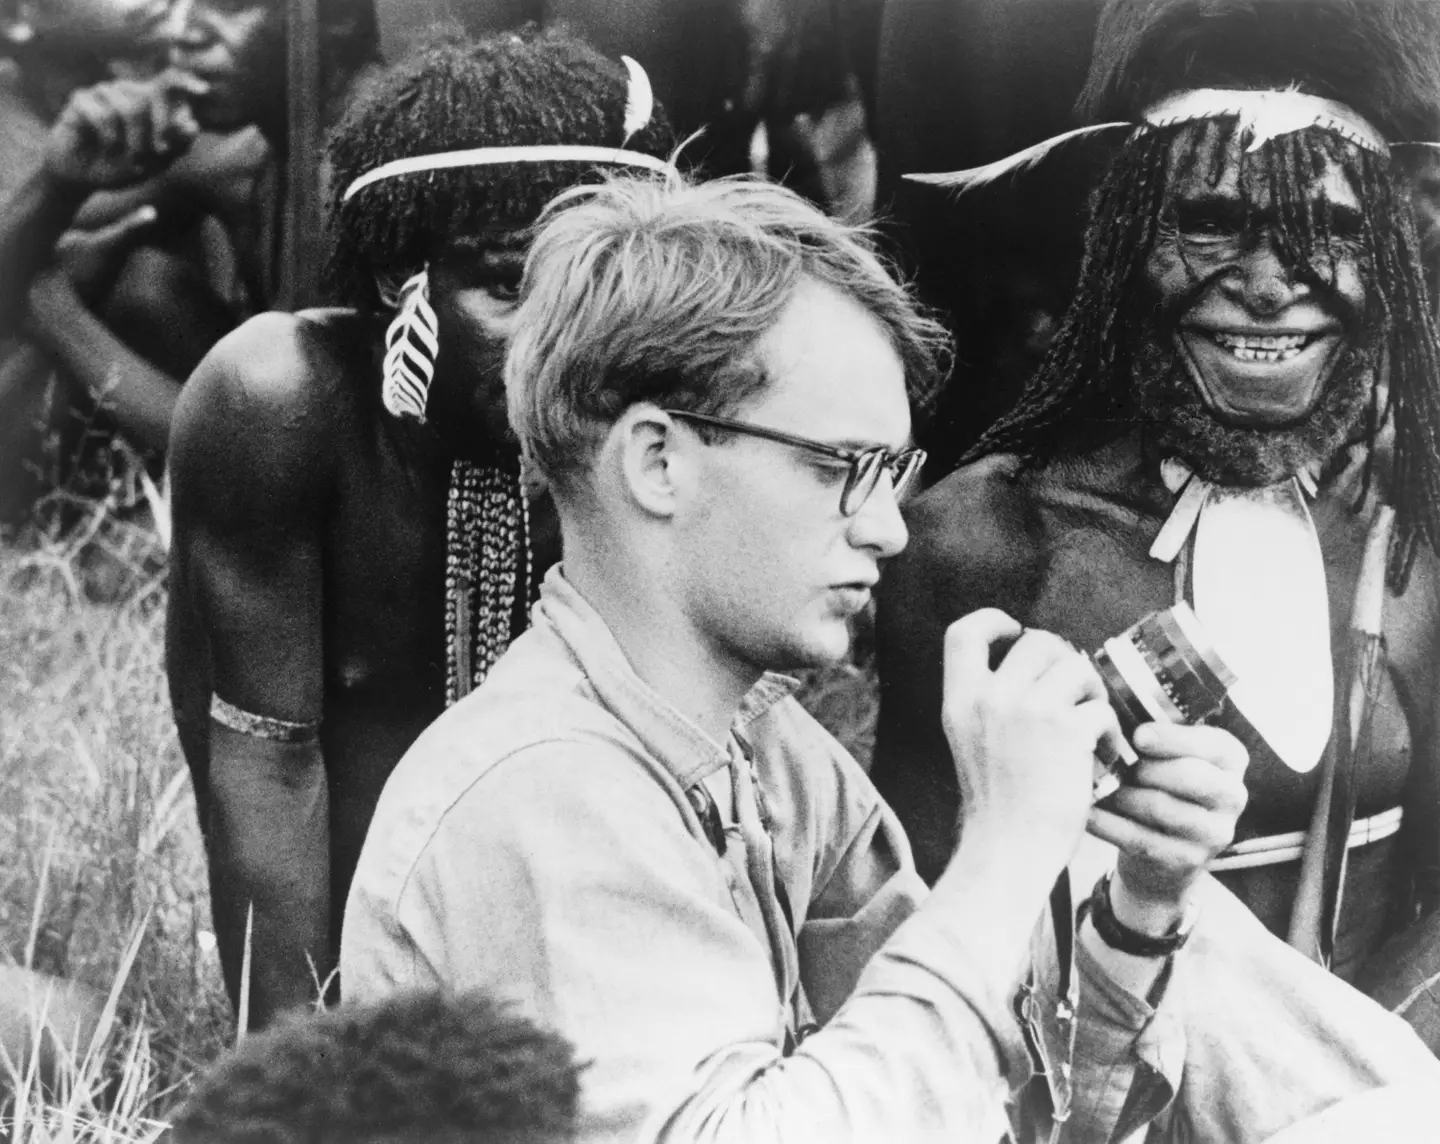 Michael C. Rockefeller (1934-1961) adjusting his camera in New Guinea, Papuan men in background. This is one of the last pictures of him alive.